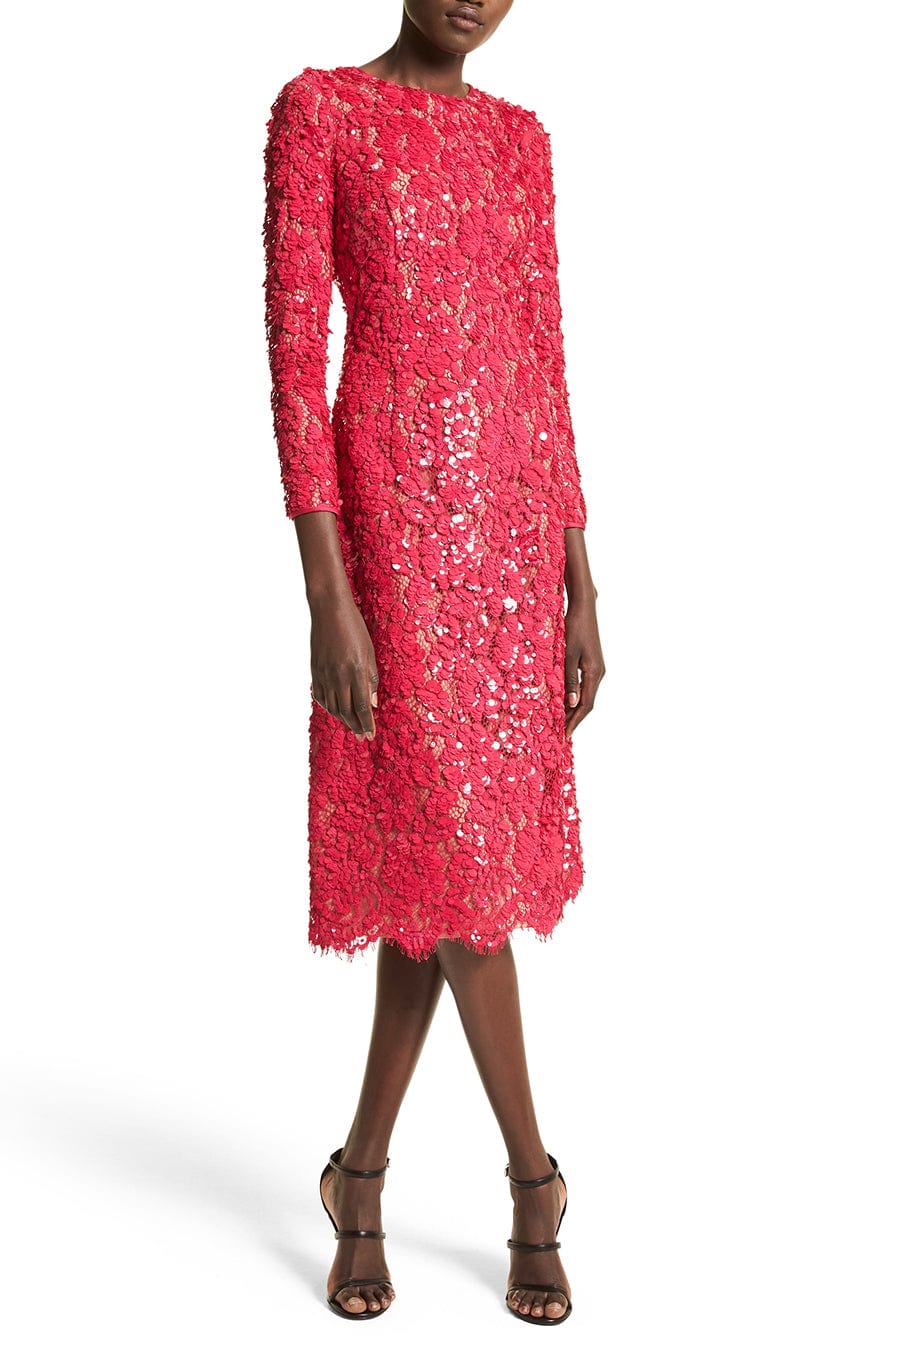 MICHAEL KORS-Paillette Hand Embroidered Dress-